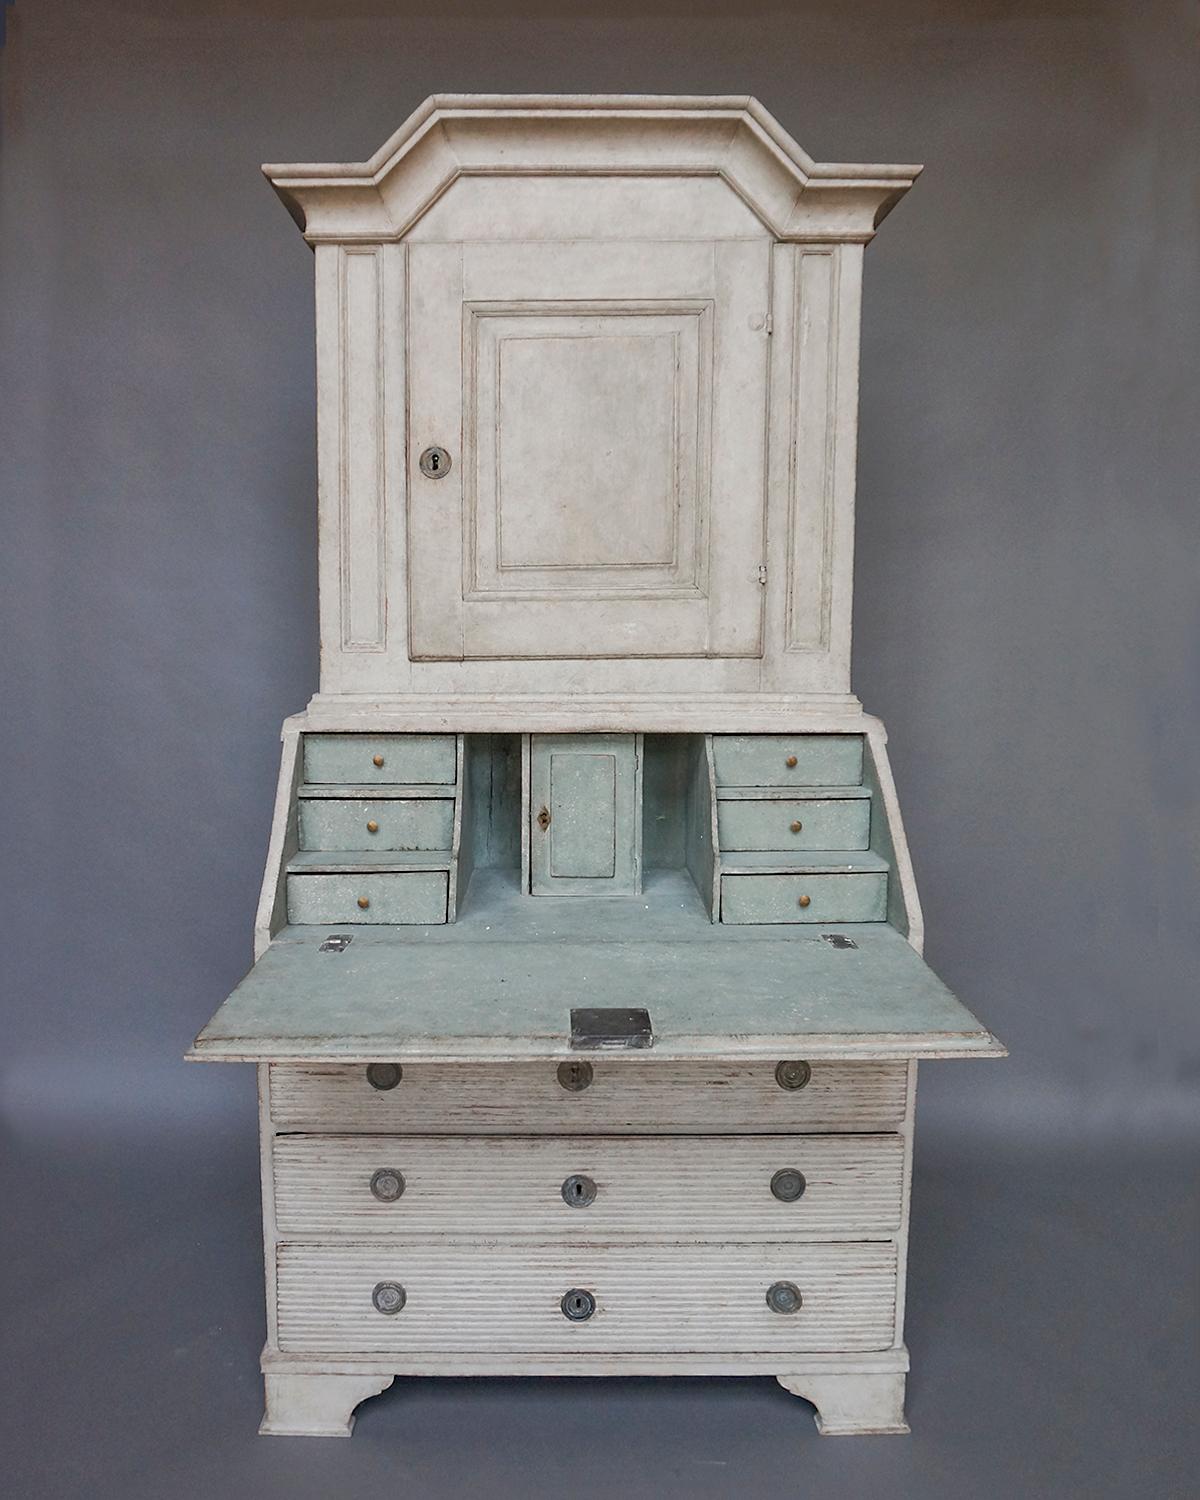 Slant-front secretary in two parts, Sweden, circa 1790. The upper section has an arched cornice and single paneled door, with two interior shelves, the top one shaped and notched for spoons. The lower section has three full width drawers and a